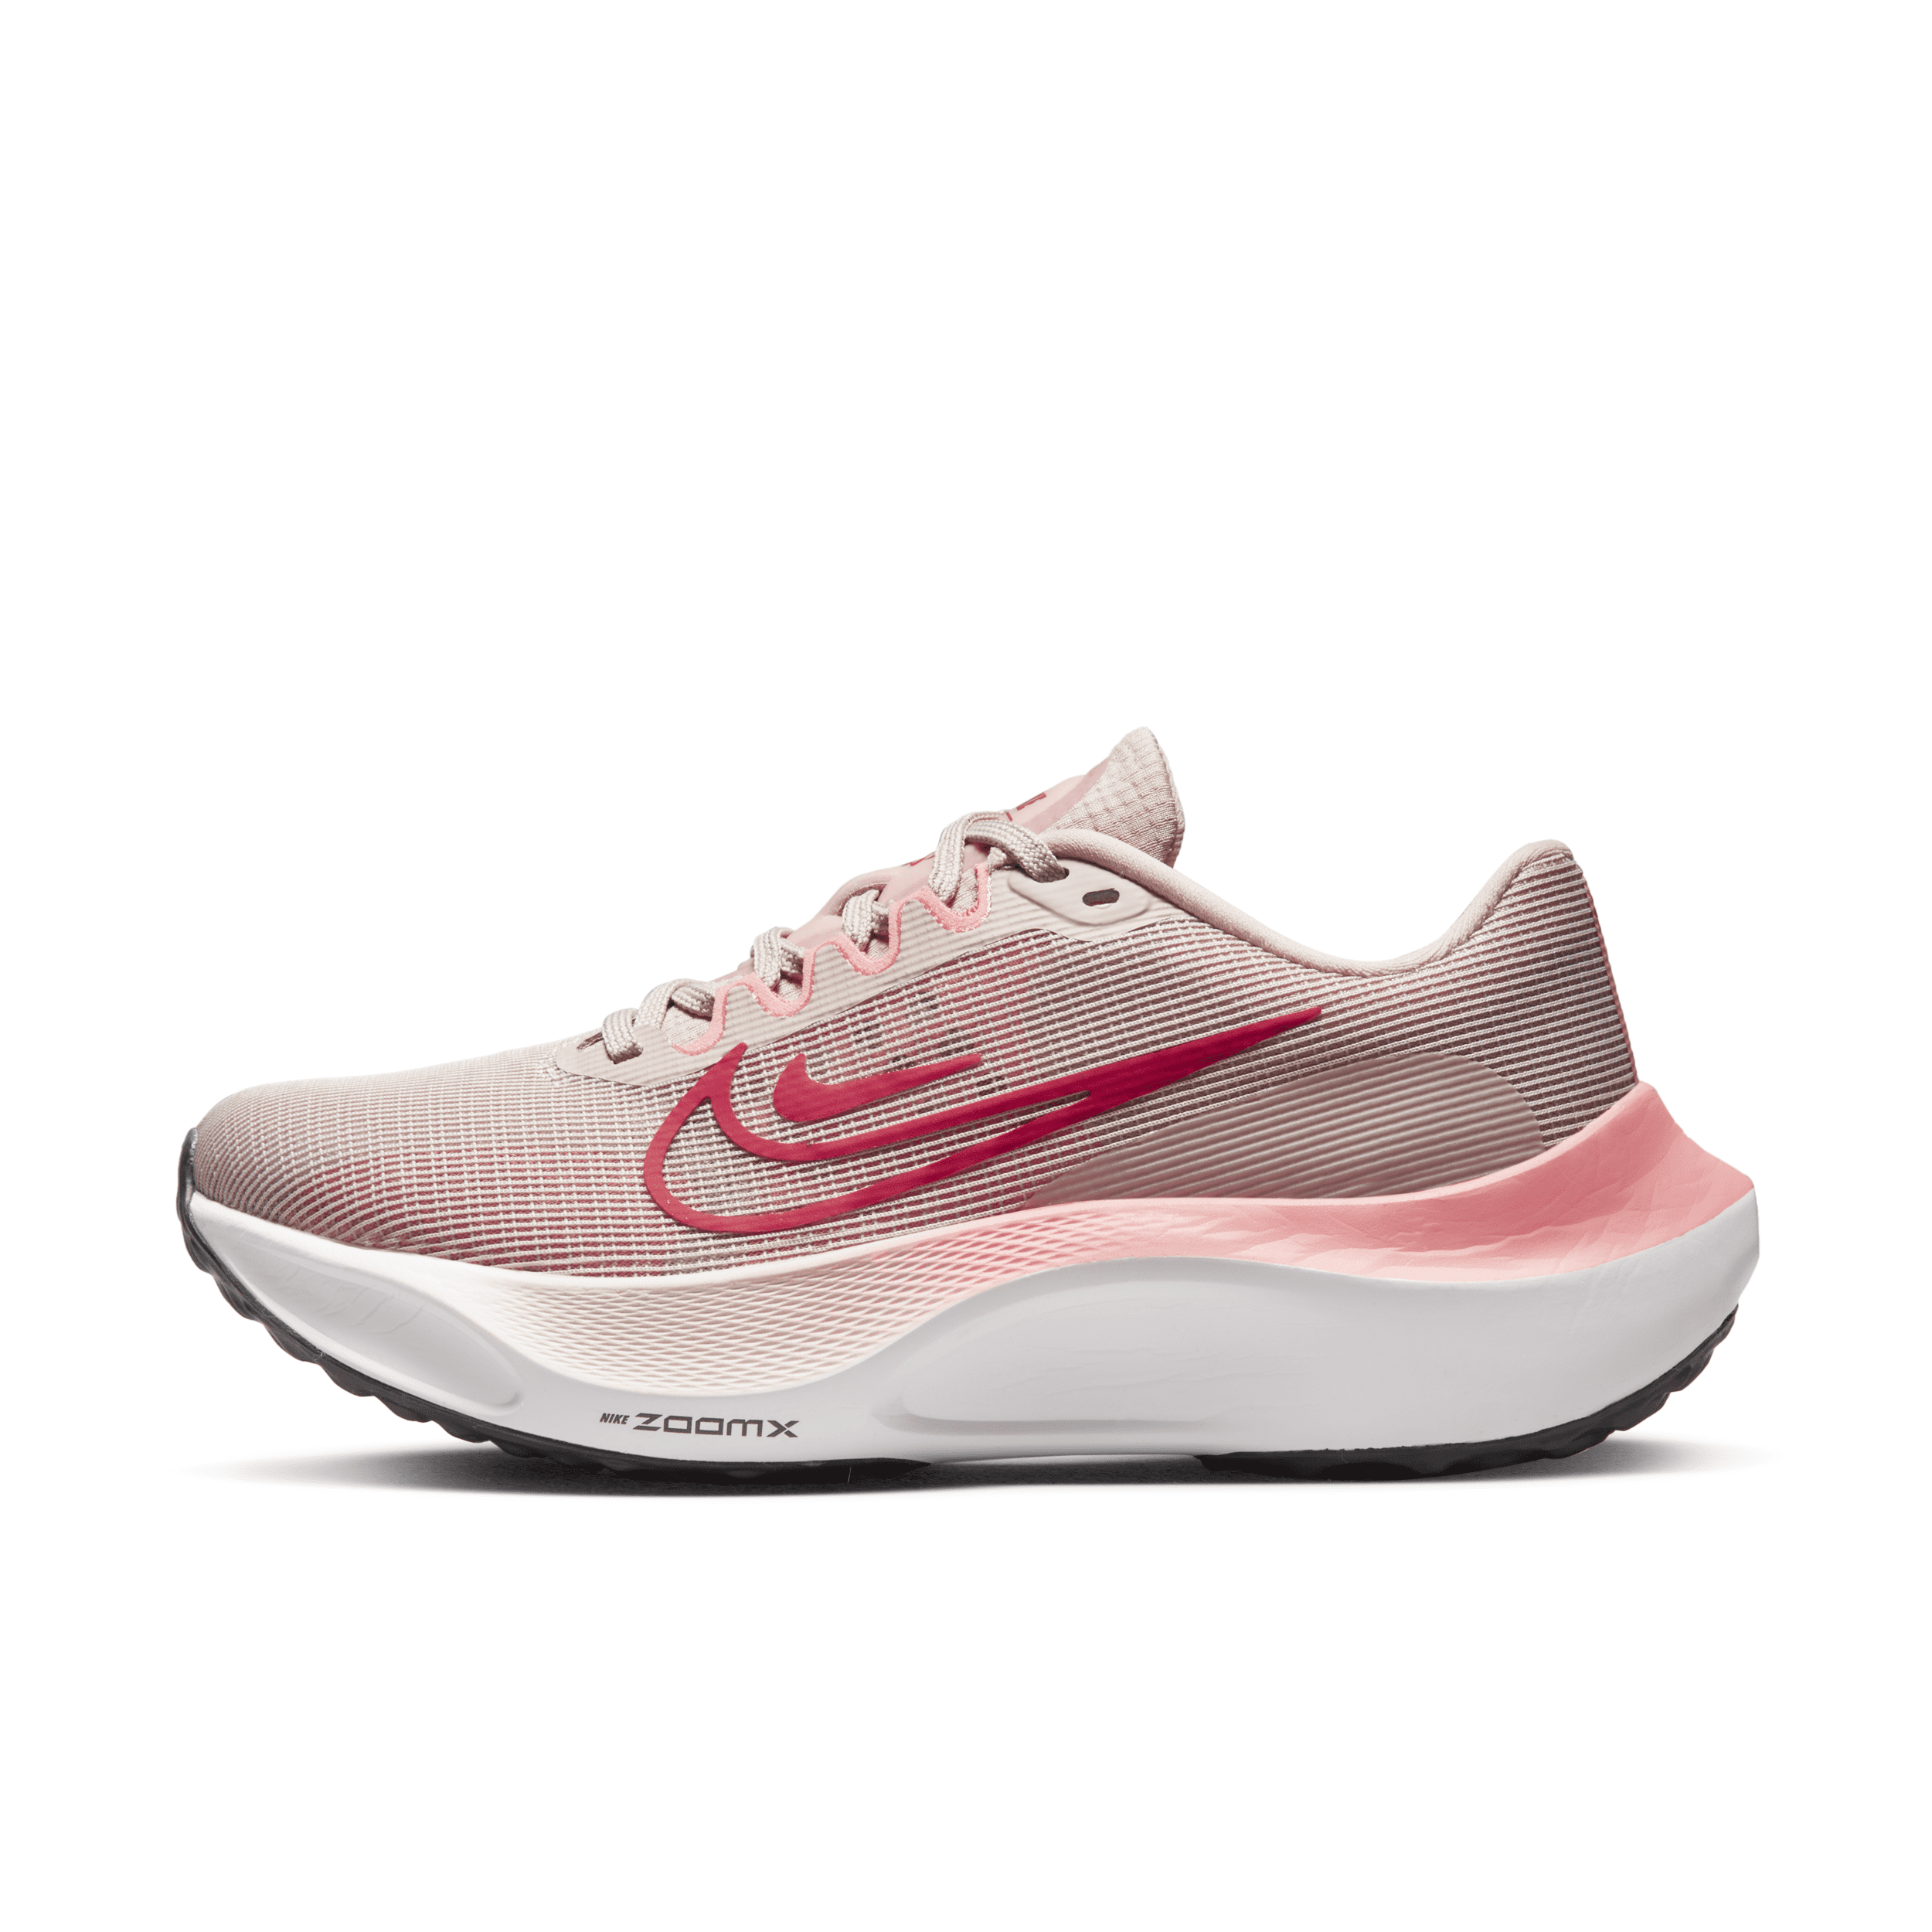 NIKE WOMEN'S ZOOM FLY 5 ROAD RUNNING SHOES,14080061